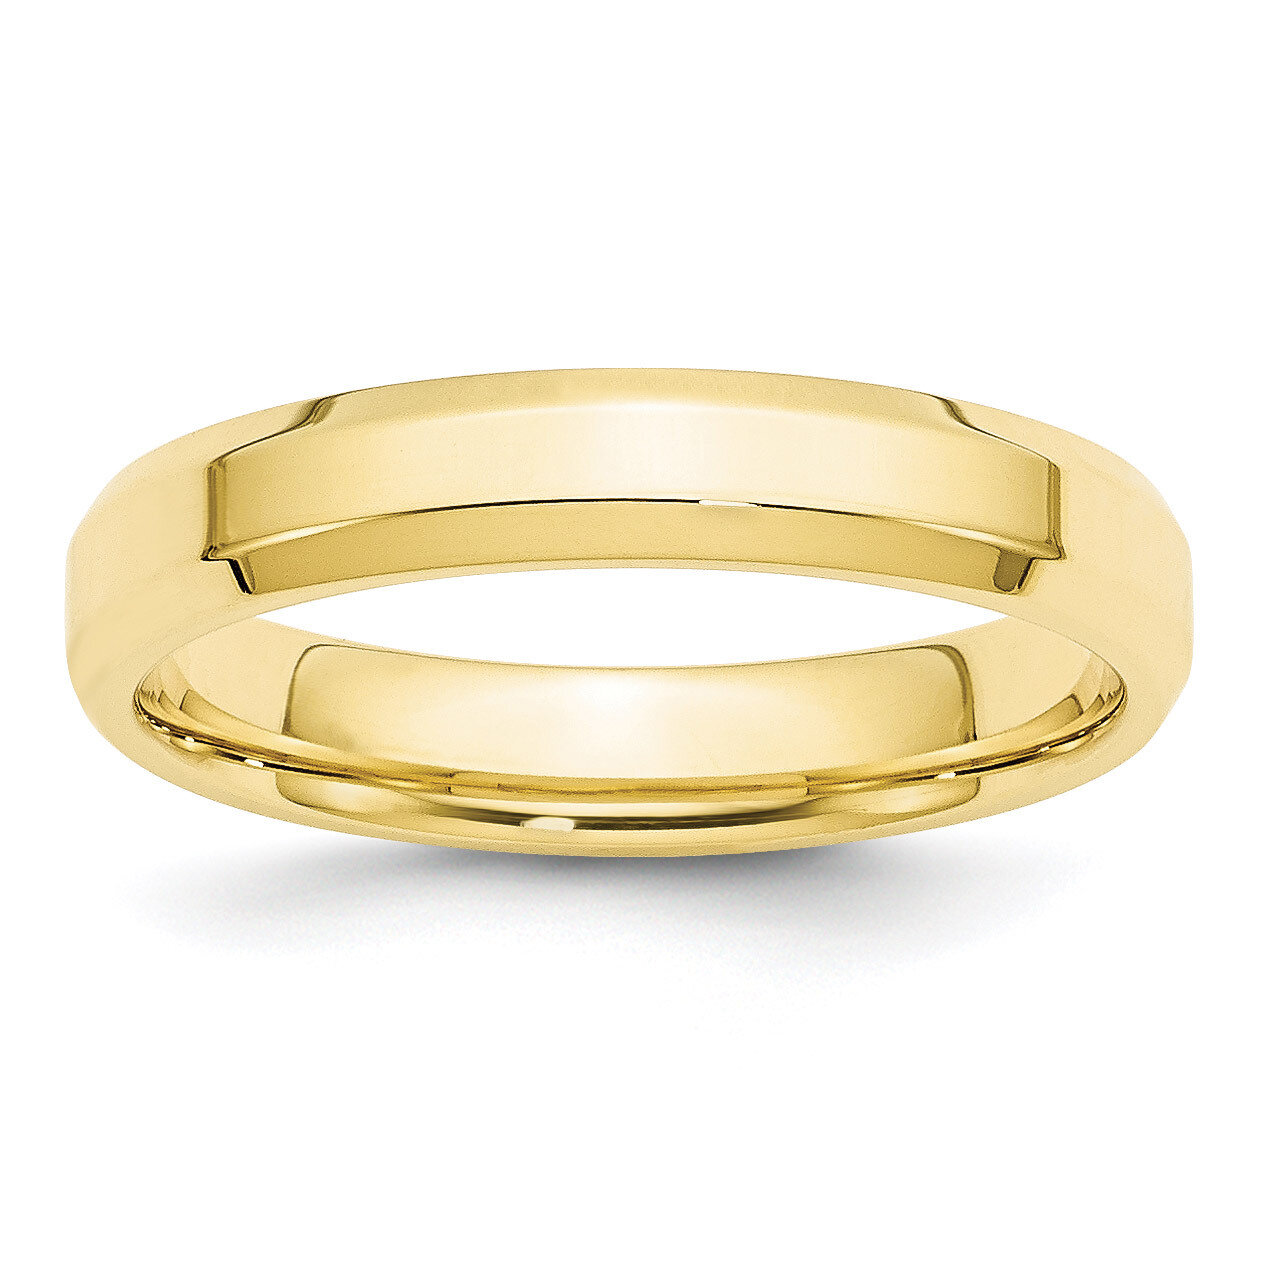 4mm Bevel Edge Comfort Fit Band 10k Yellow Gold 1BEC040 Engravable